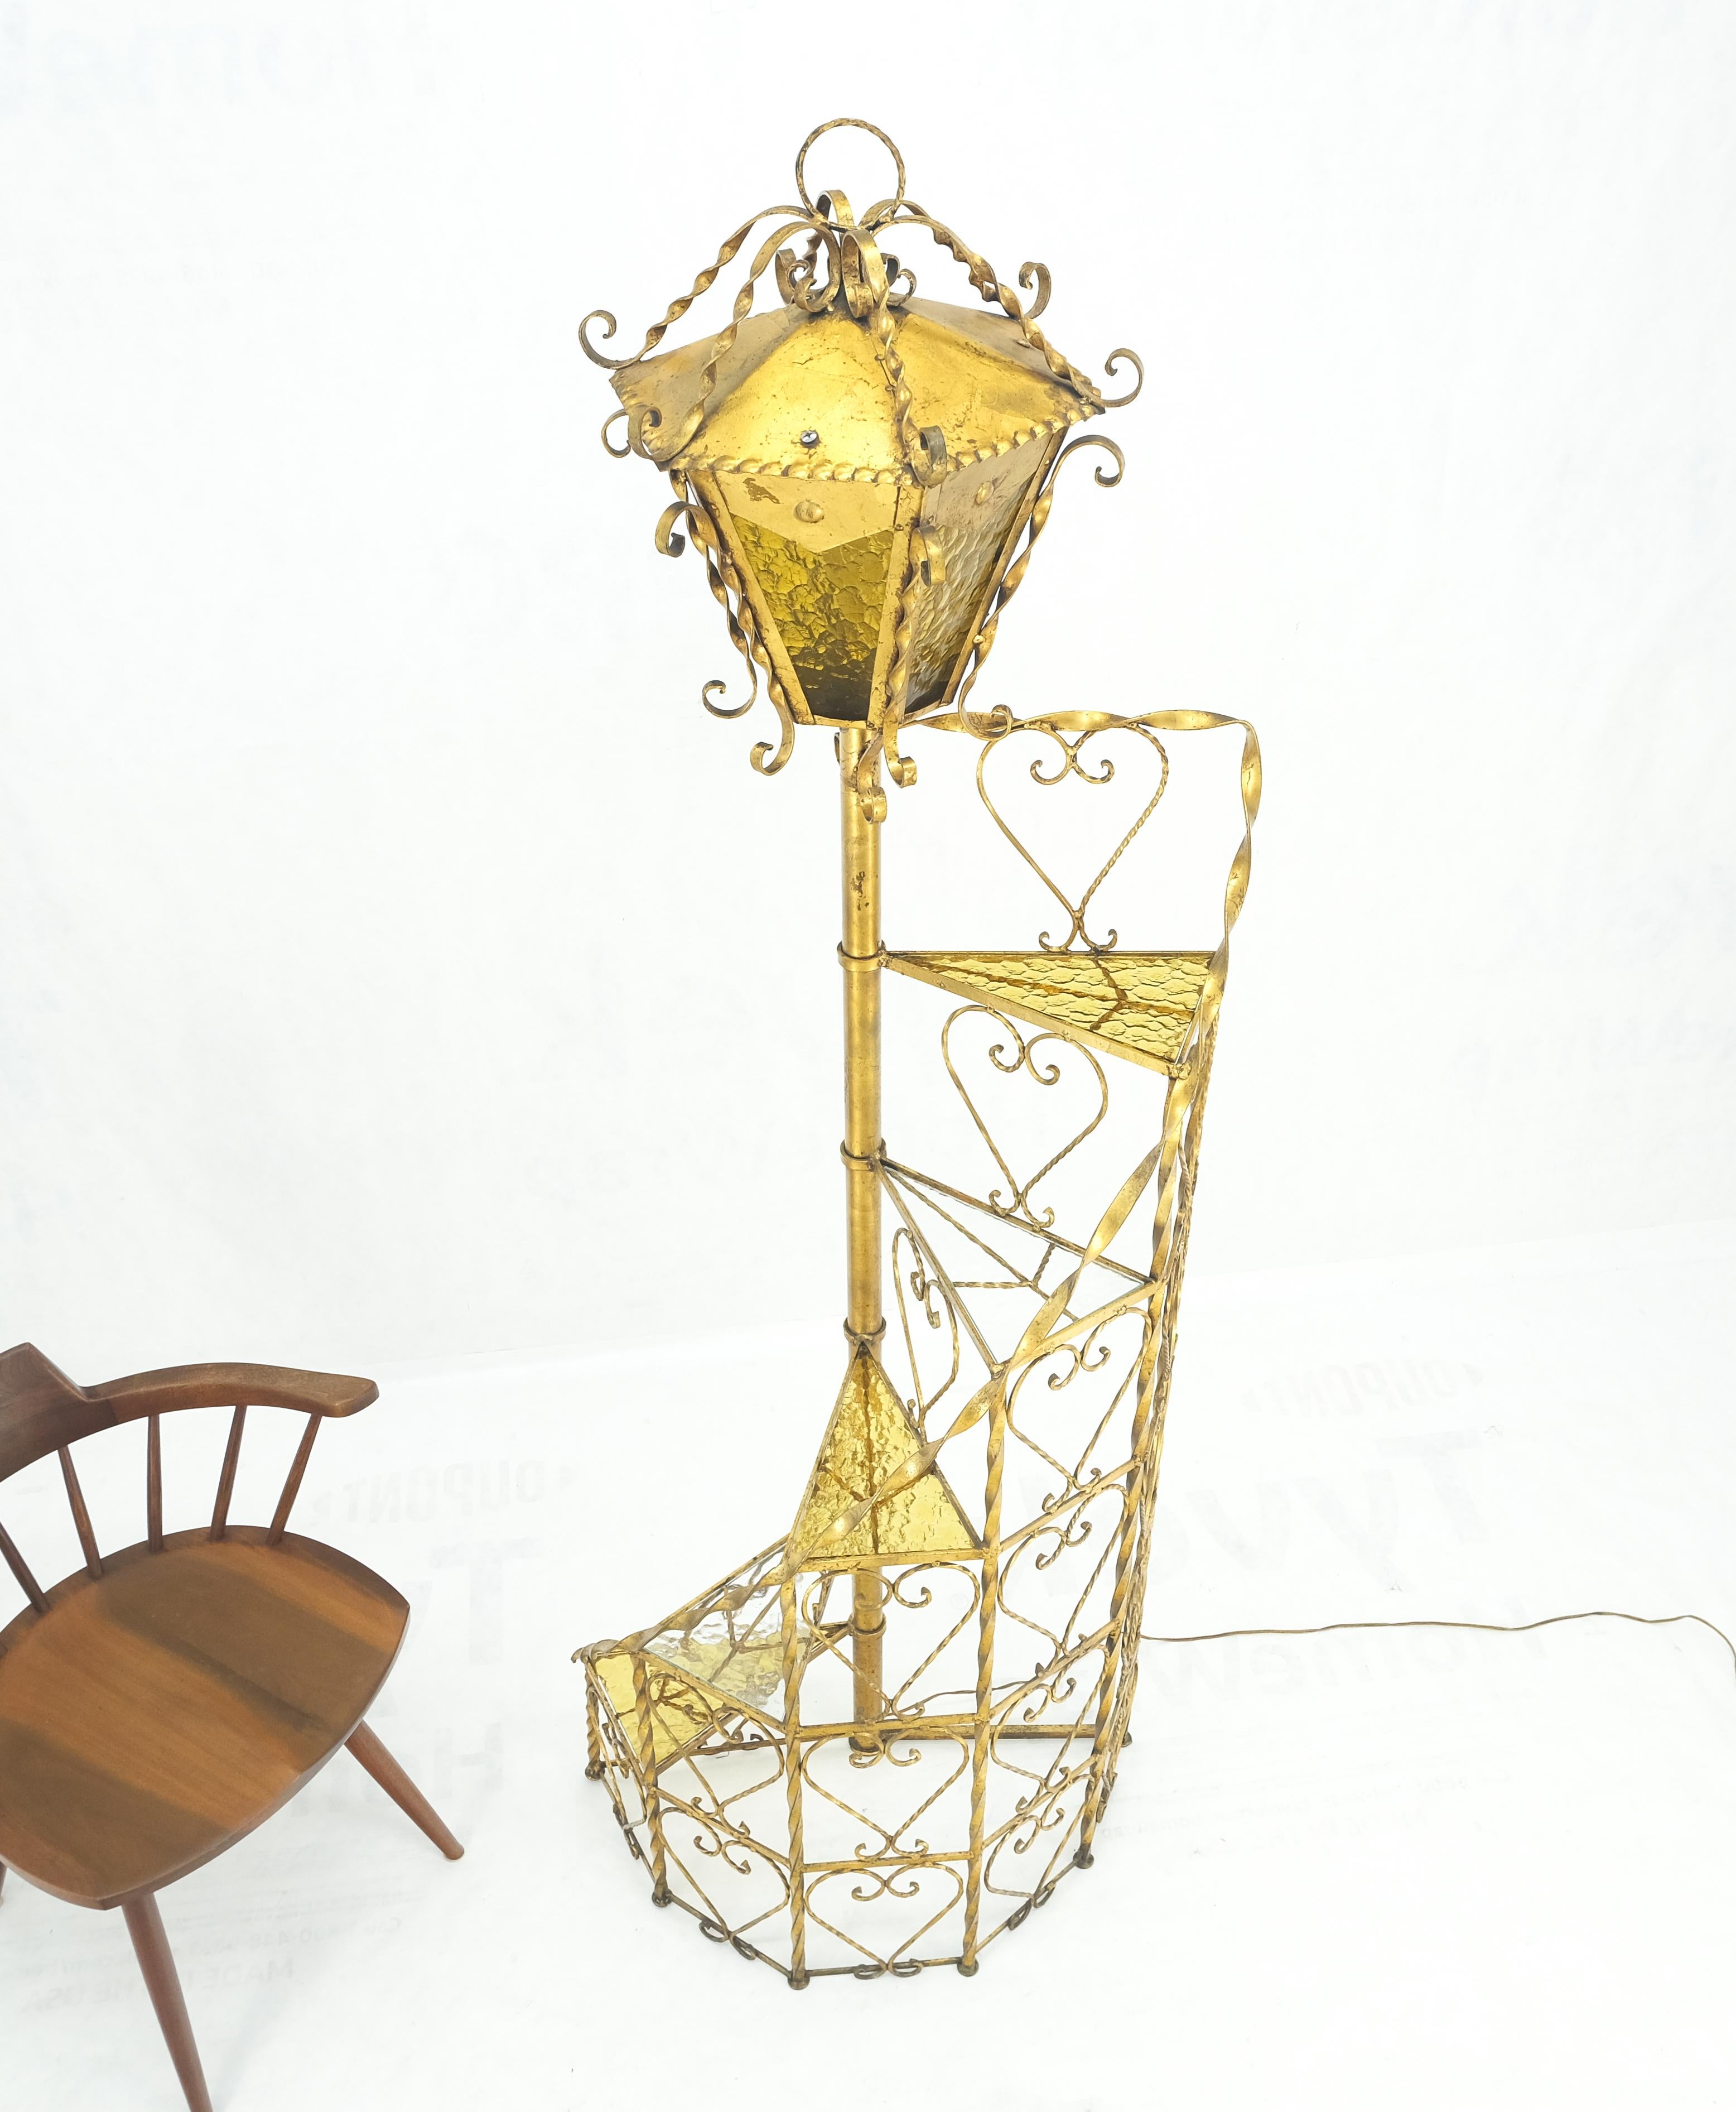 20th Century 5 tier Gold Gilt Spiral Plant Stand Floor Lamp Lantern Shade Decorative MINT! For Sale